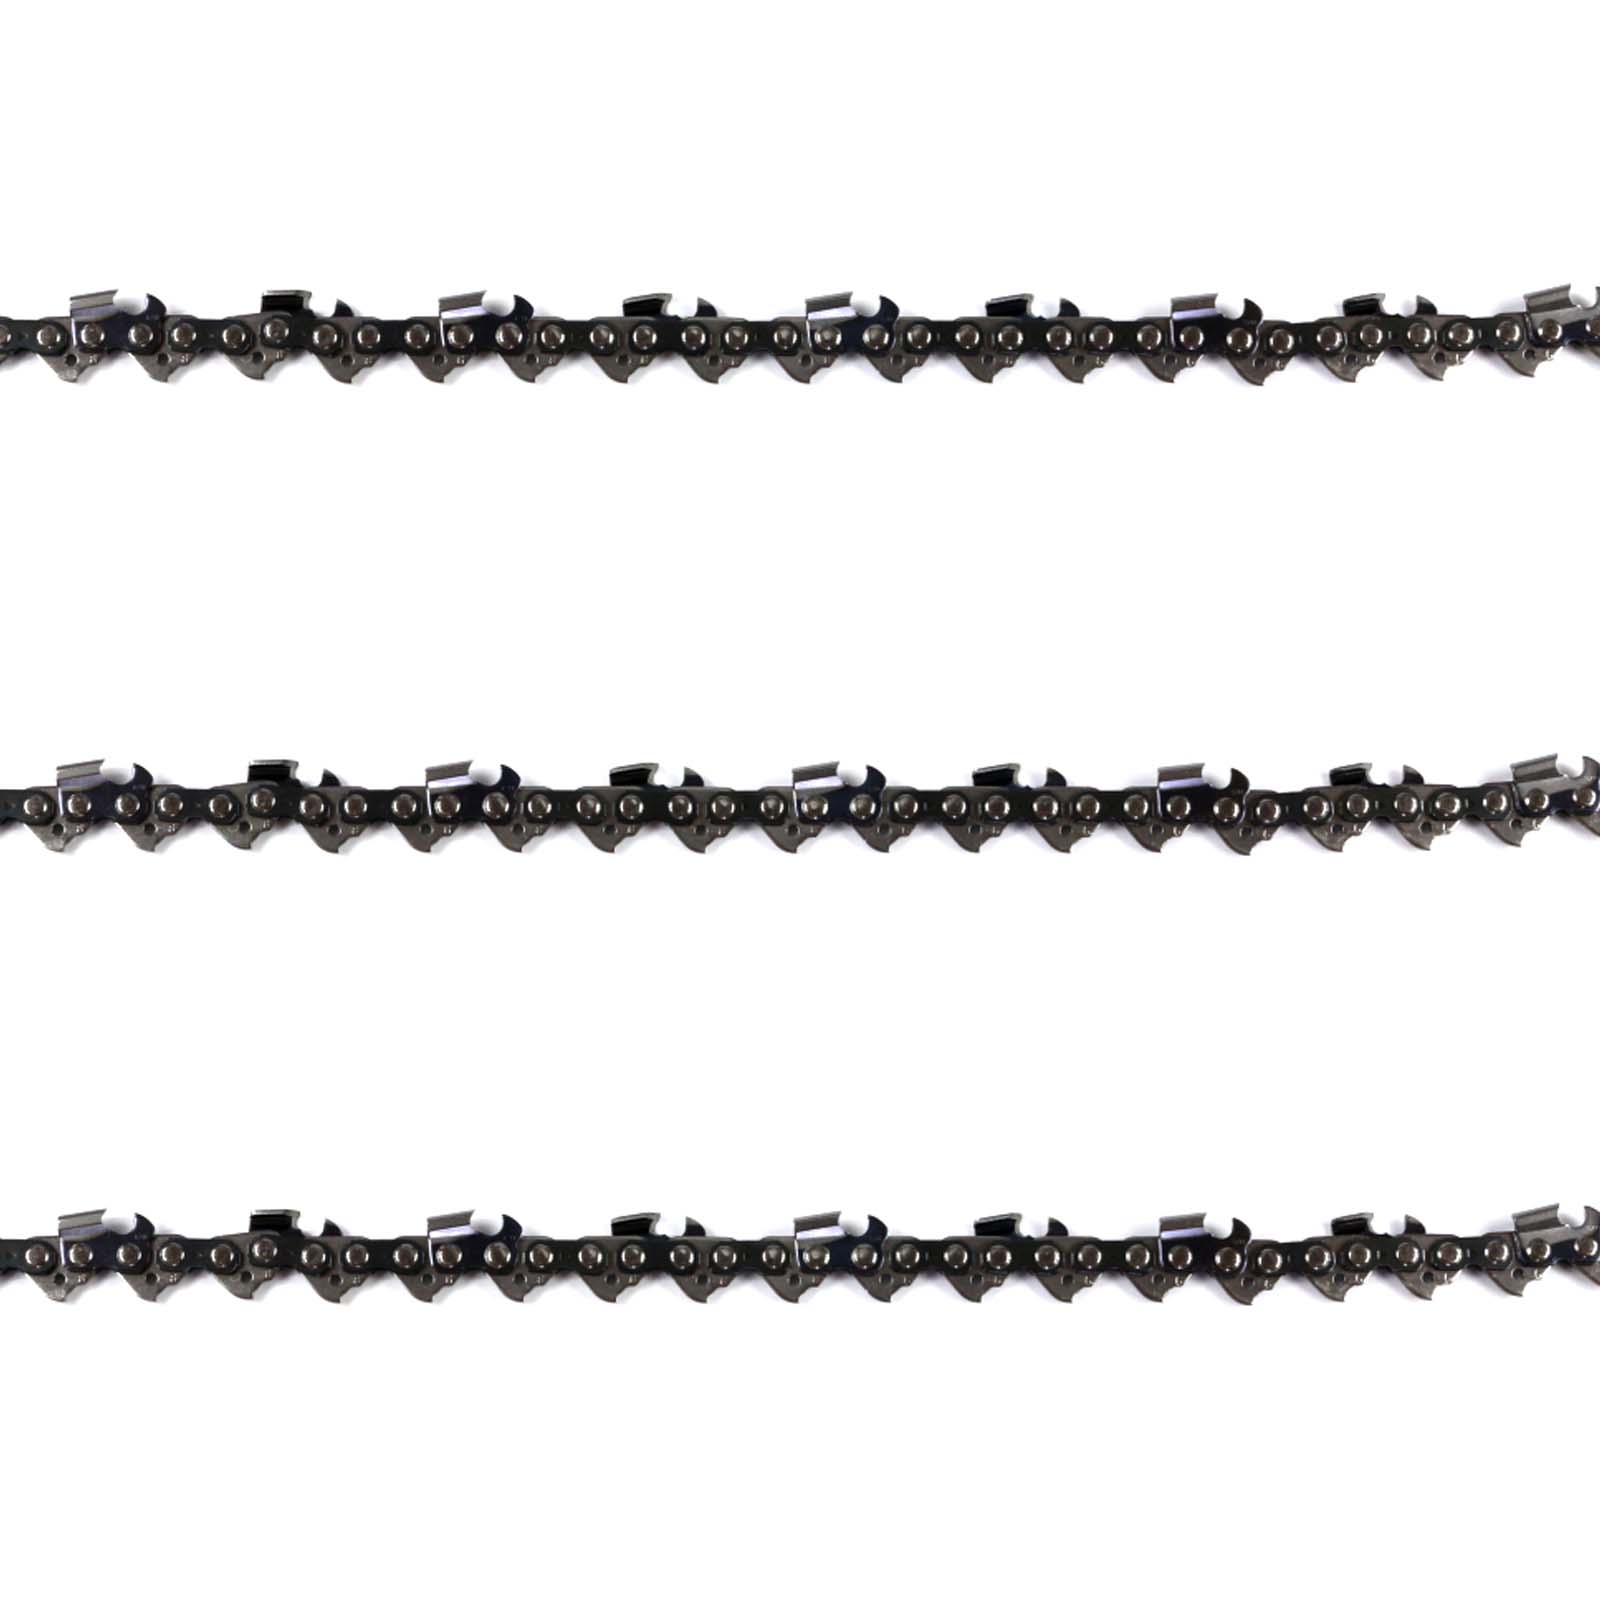 Homelite Chainsaw Chain Replacement Chart